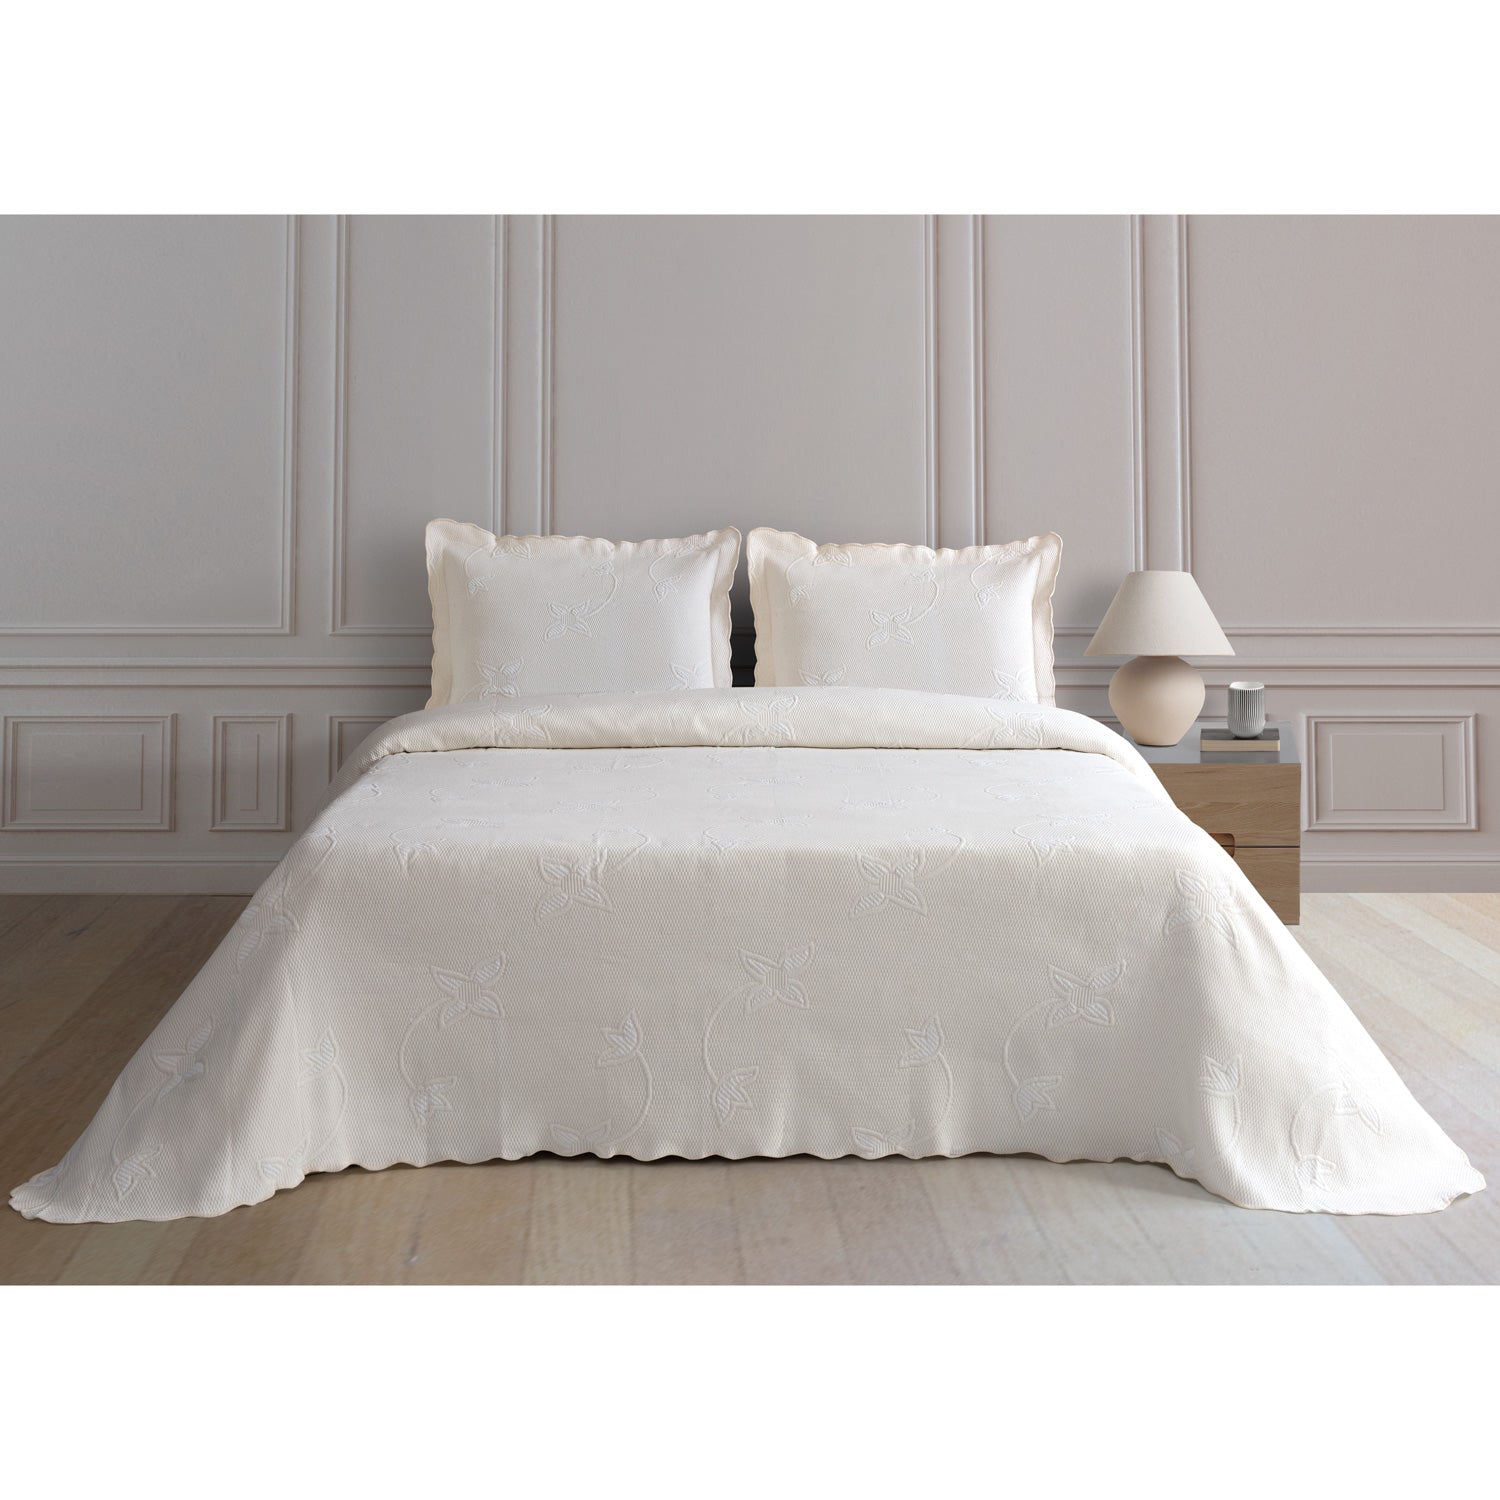 The Home Collection Caprice Bedspread - Kingsize - Champagne 1 Shaws Department Stores